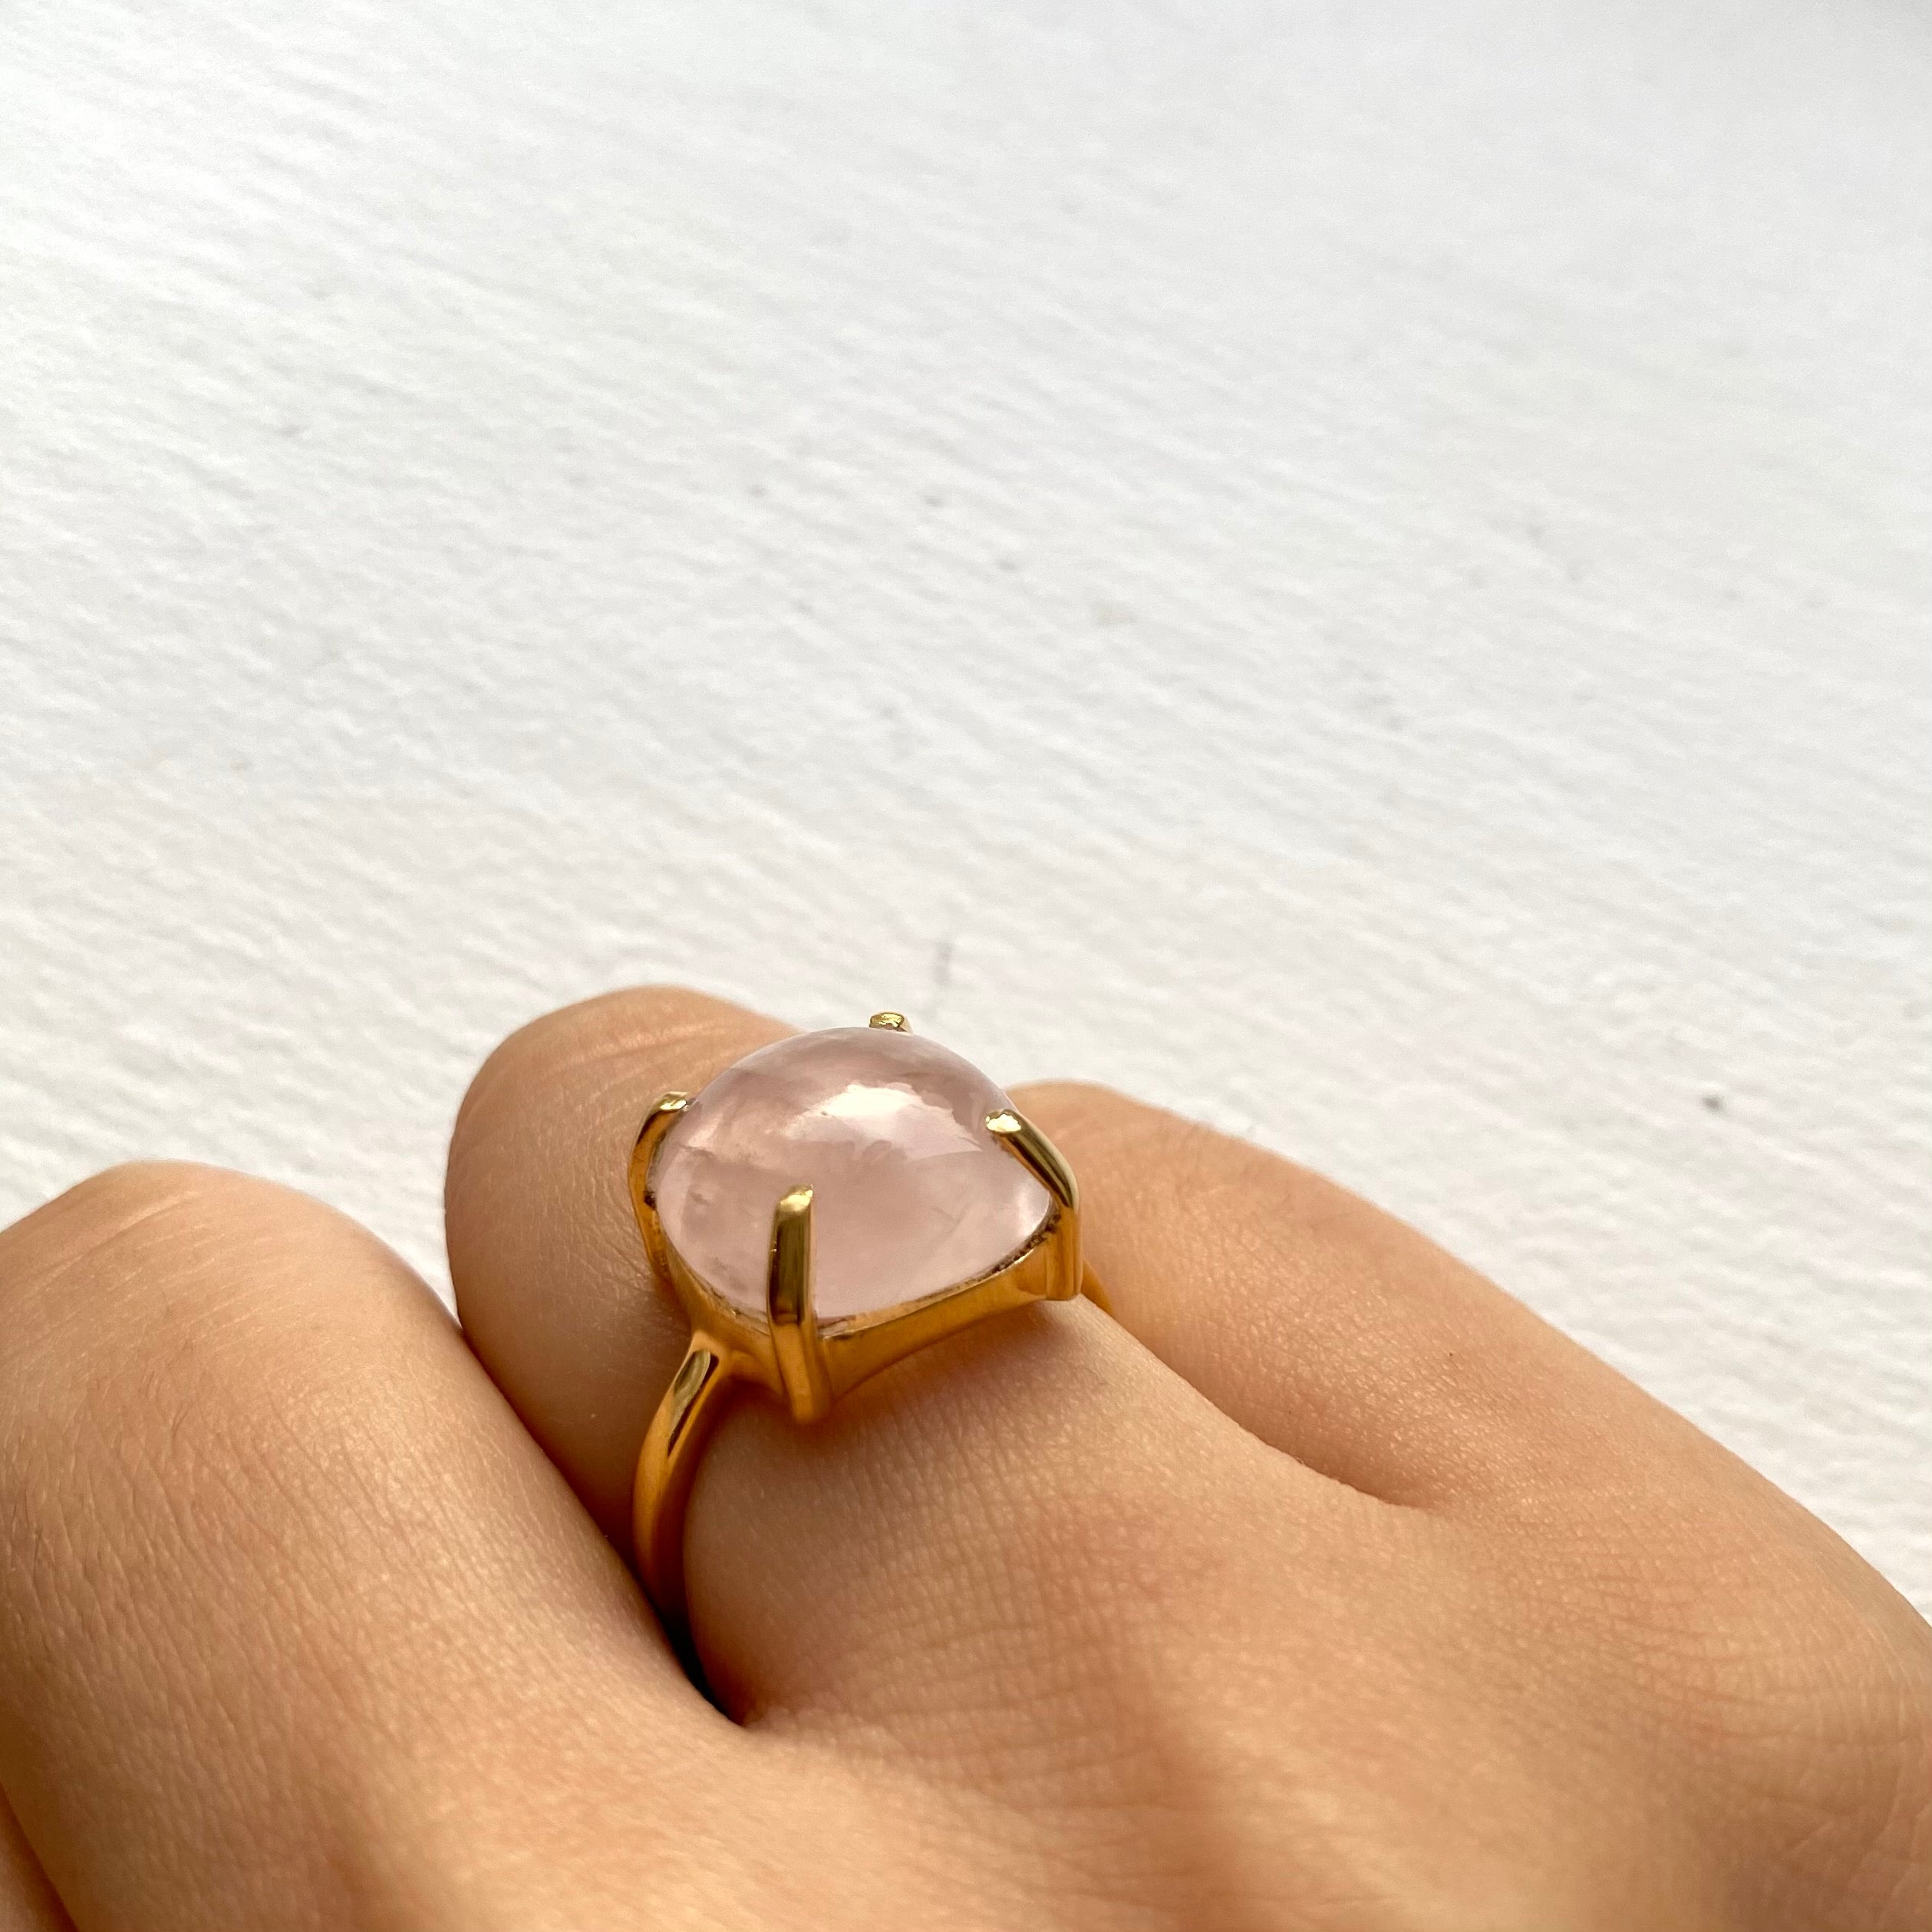 Square Cabochon Rose Quartz Ring in Gold Plated Sterling Silver